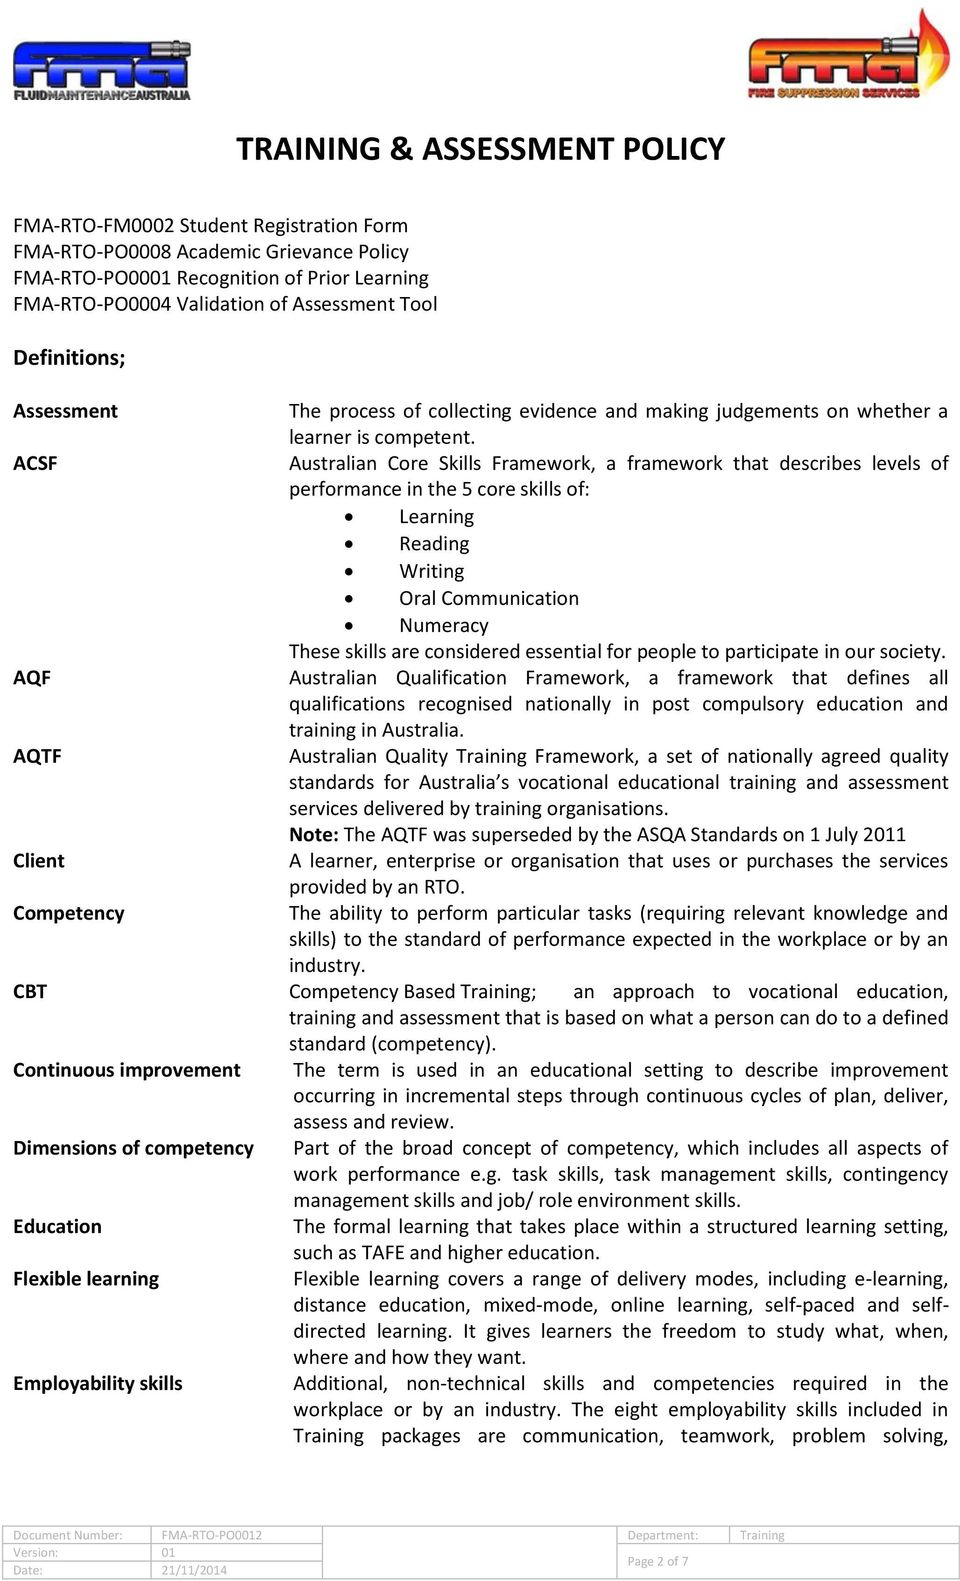 ACSF Australian Core Skills Framework, a framework that describes levels of performance in the 5 core skills of: Learning Reading Writing Oral Communication Numeracy These skills are considered